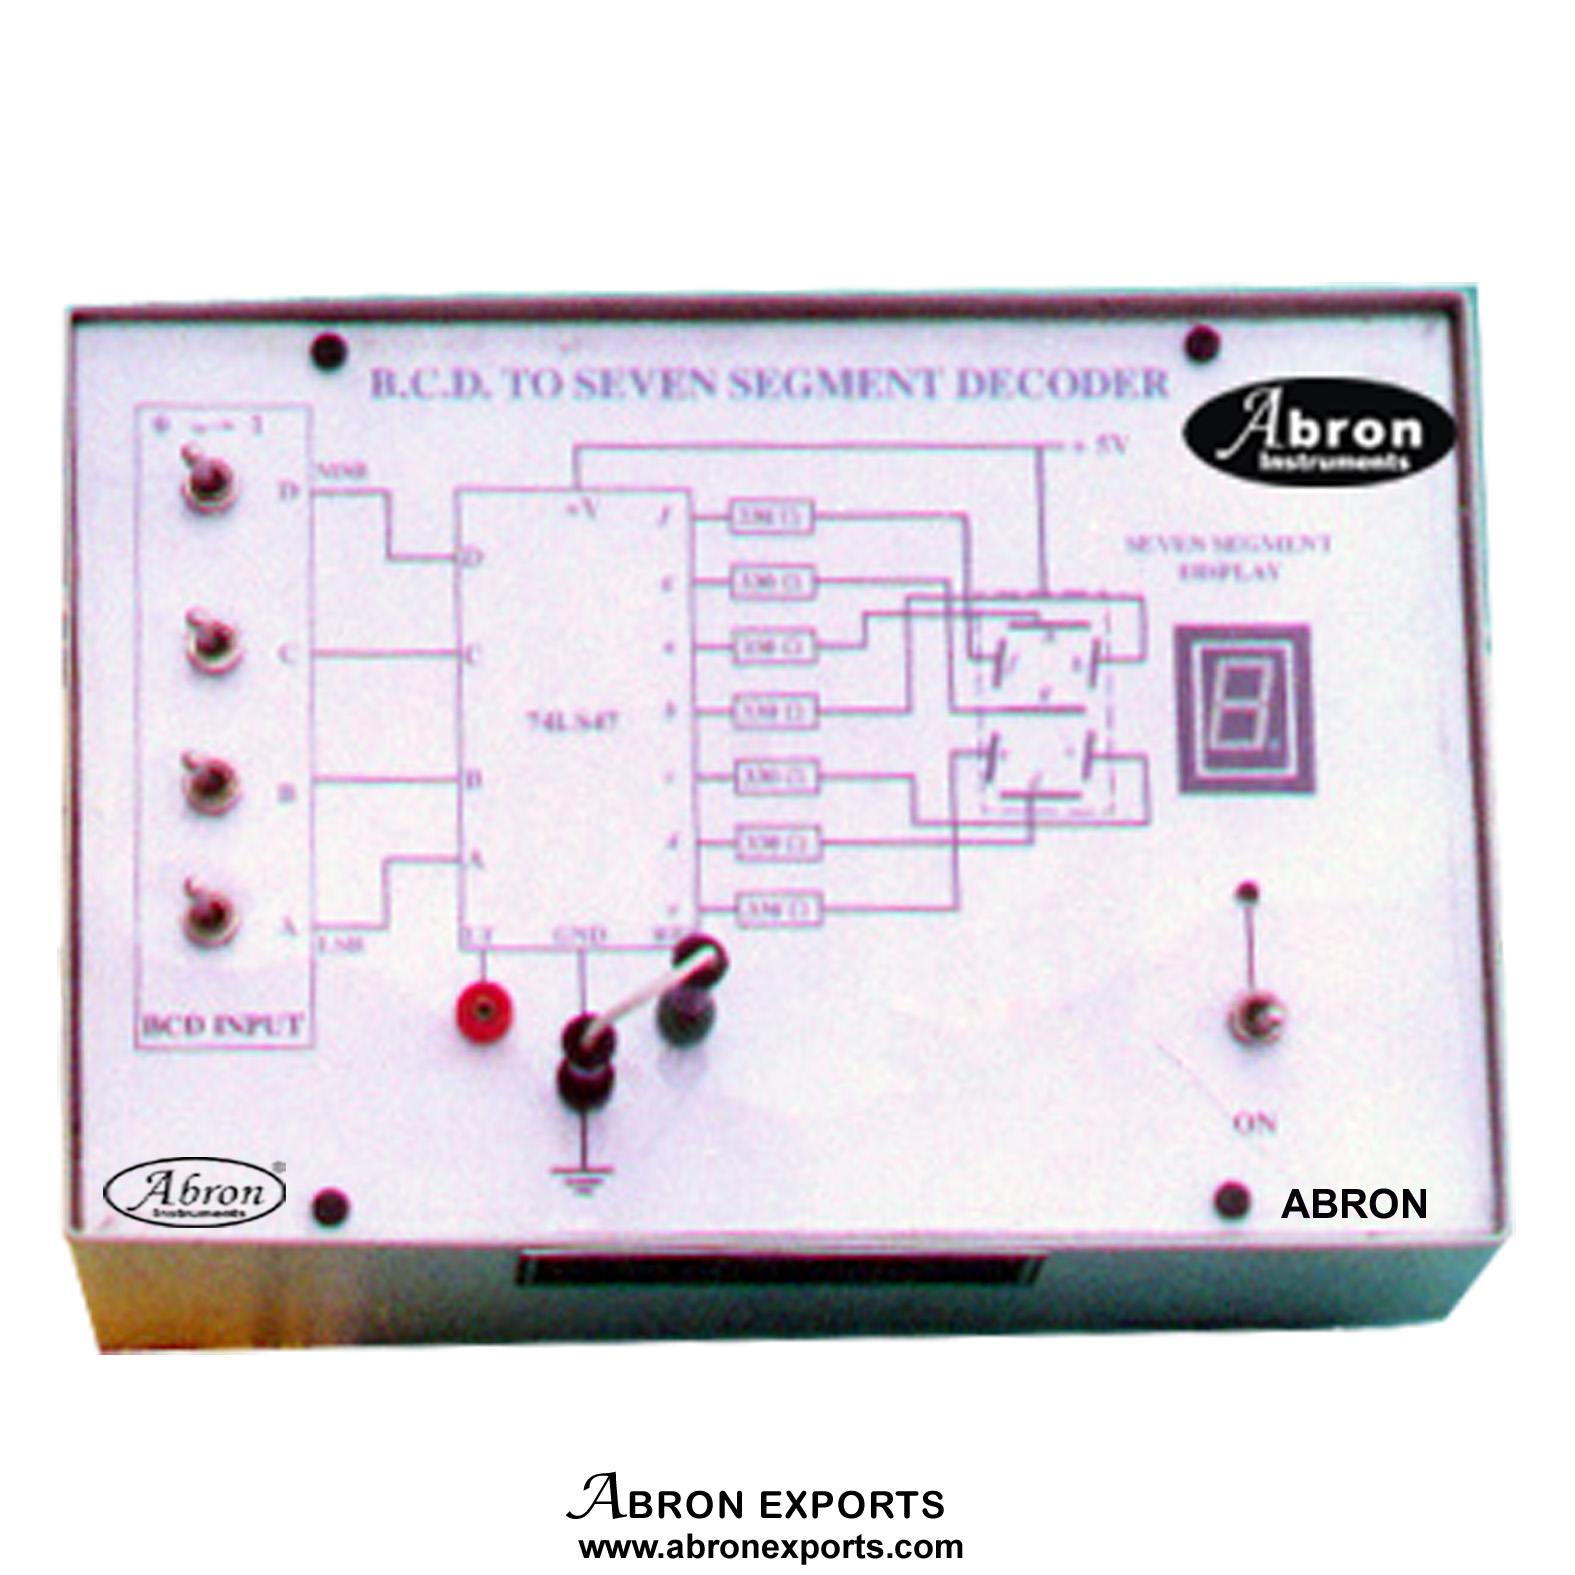 BCD to Seven Segment Logic Gates Digital Circuit Trainer Electronic Circuit Board With Wire Power Supply Set up AE-1210B	